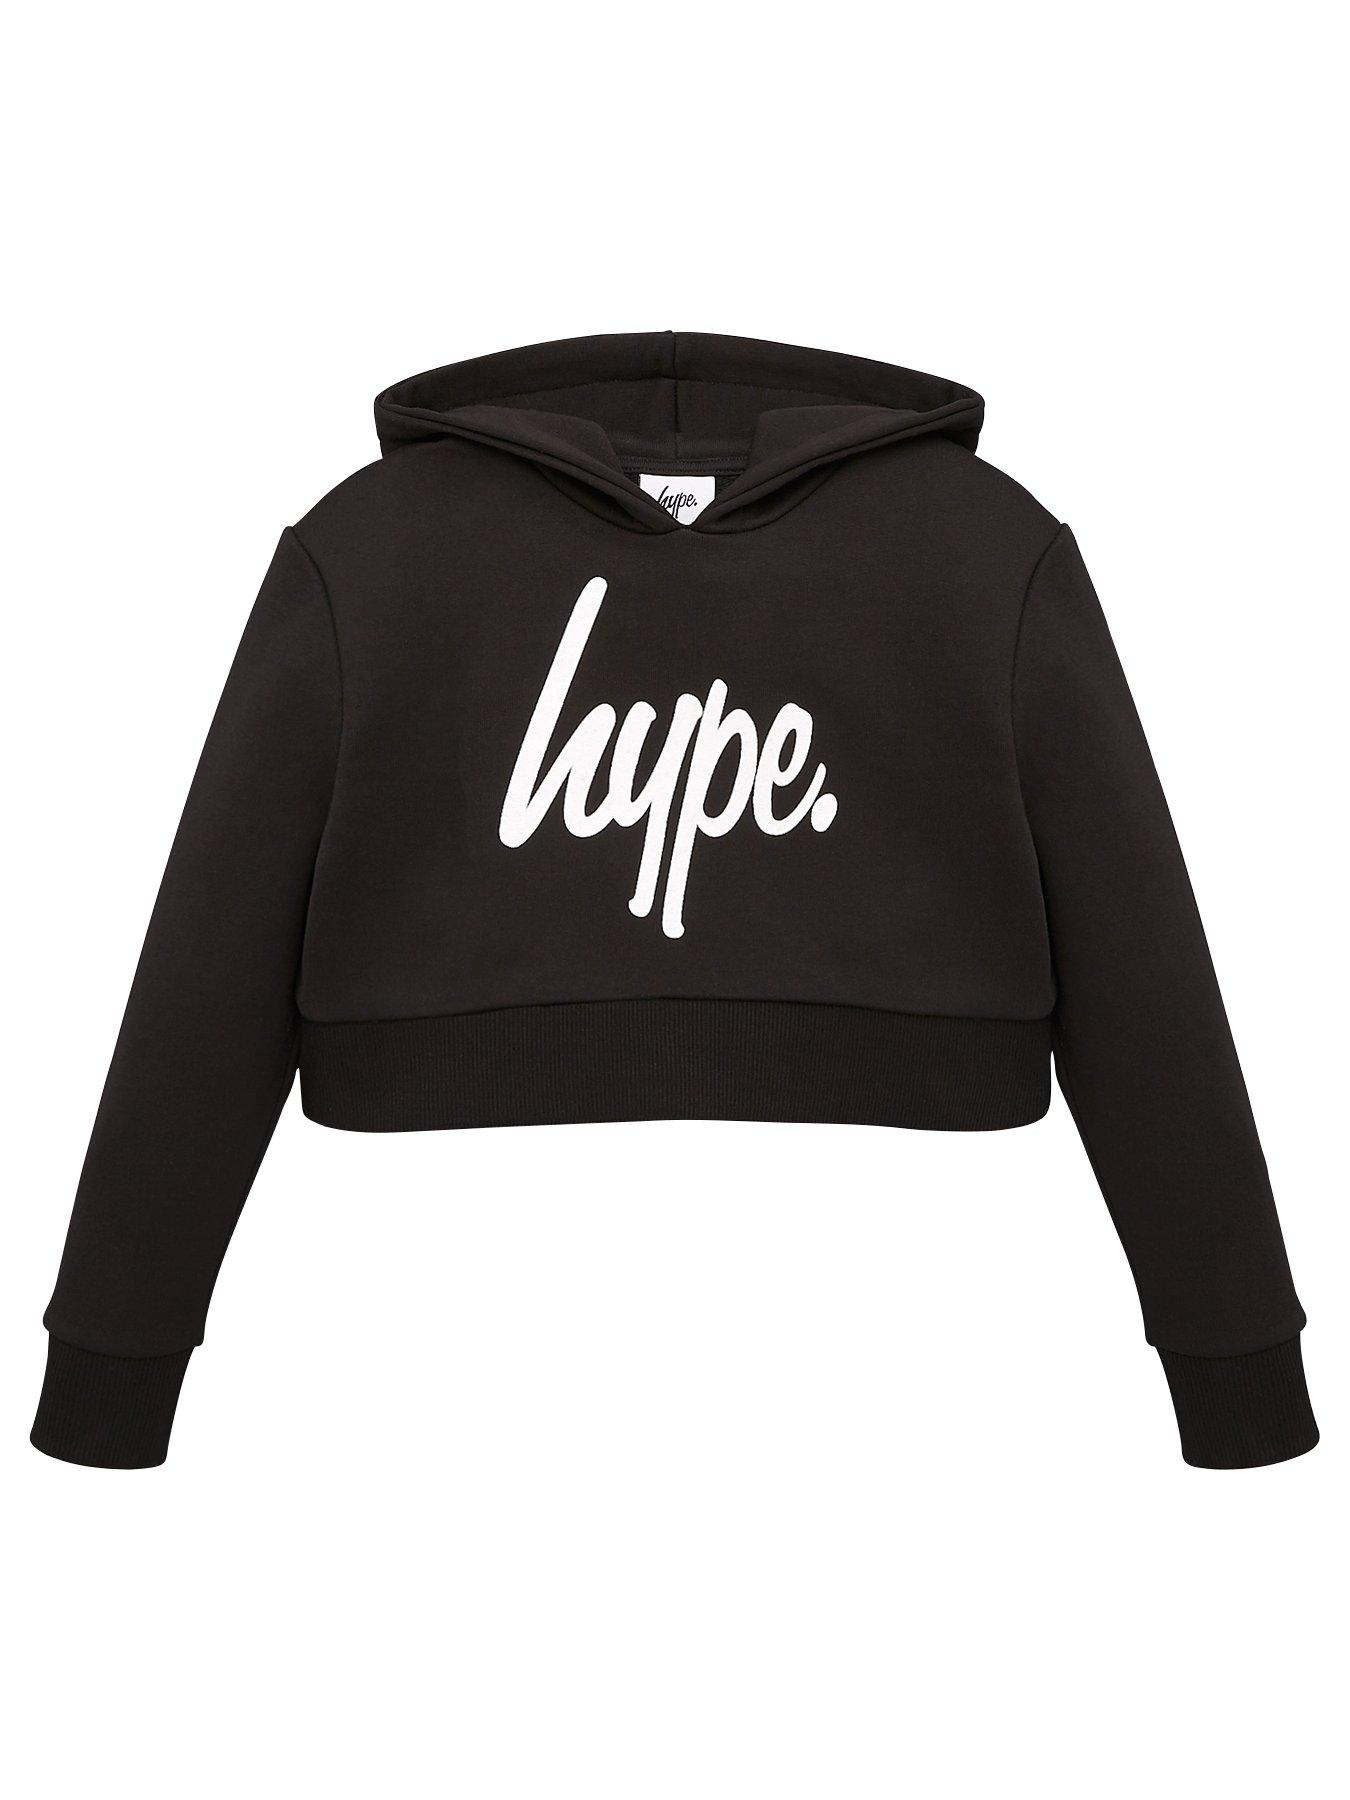 Hype Boys Black And White Hype Hoodie Age 13 Years 